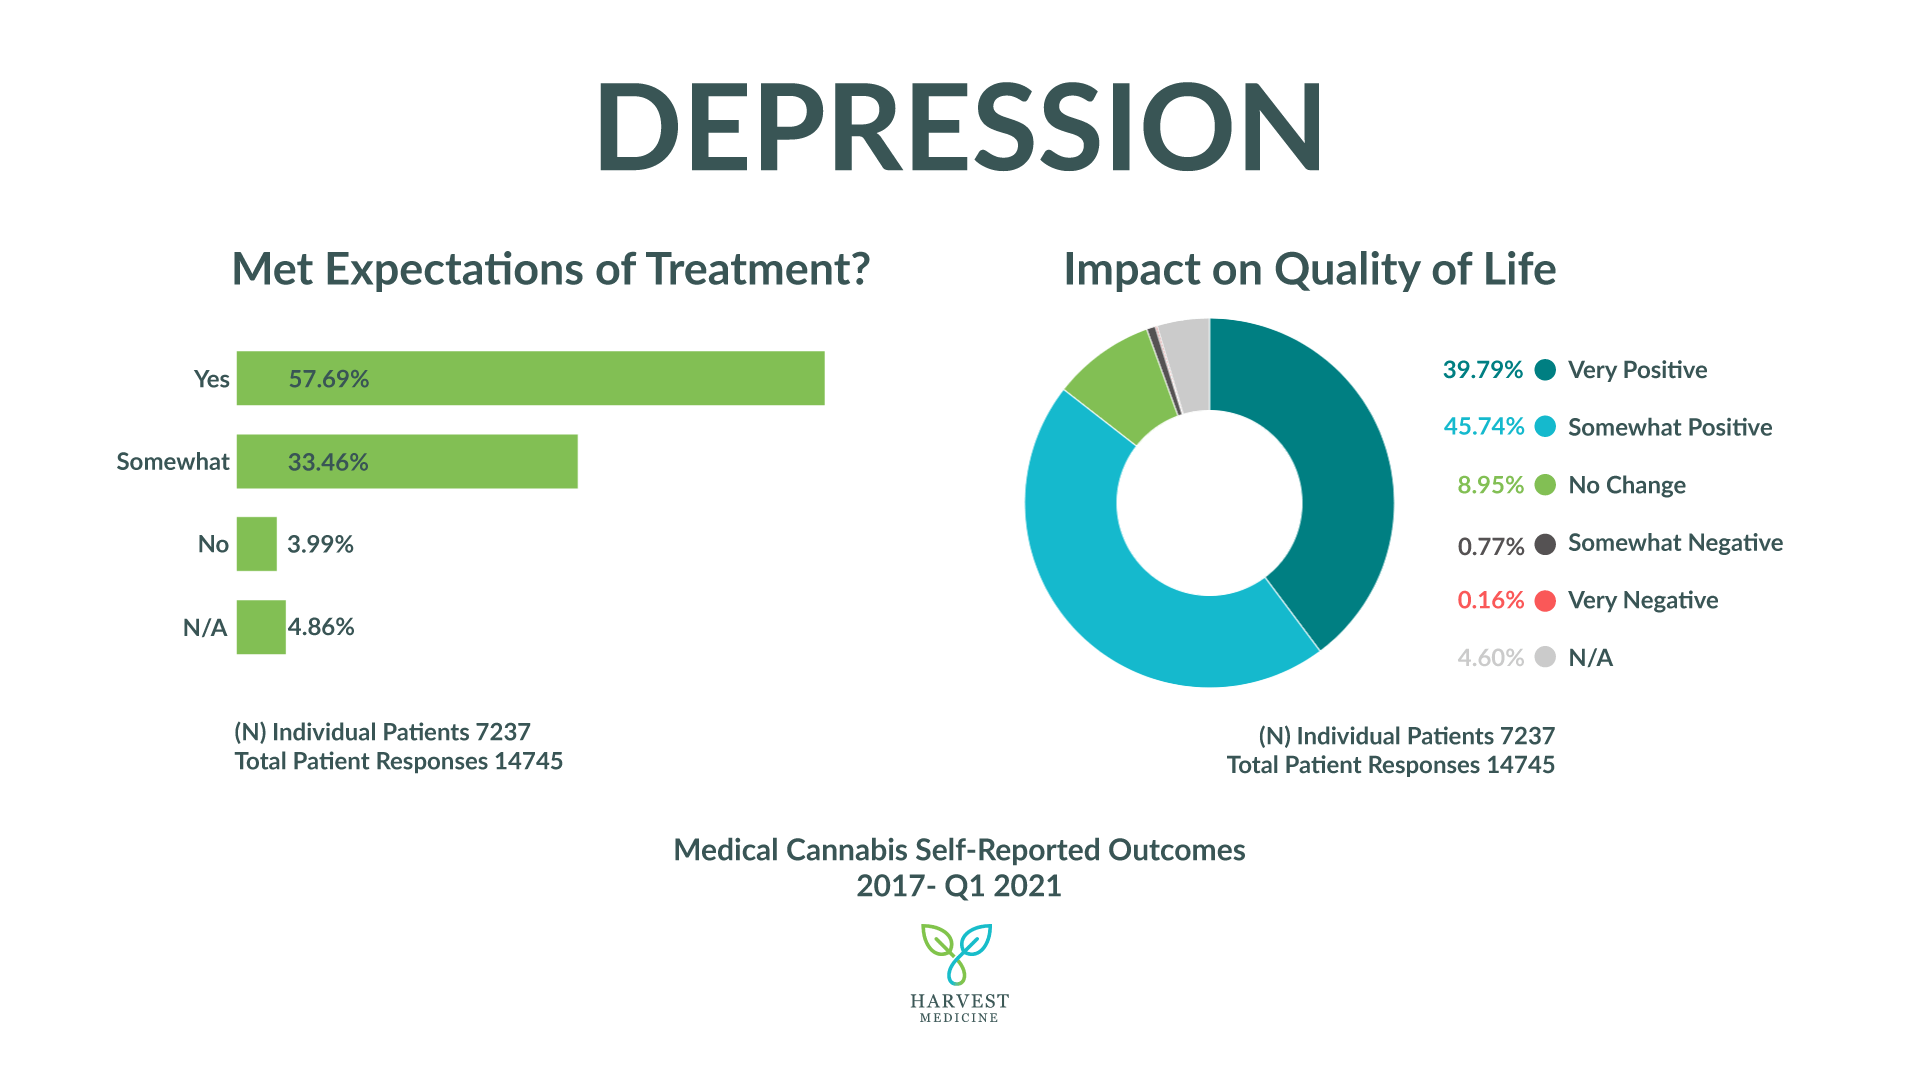 Harvest Medicine's patient self-reported outcomes for depression from 2017-2021. Sample size 7237